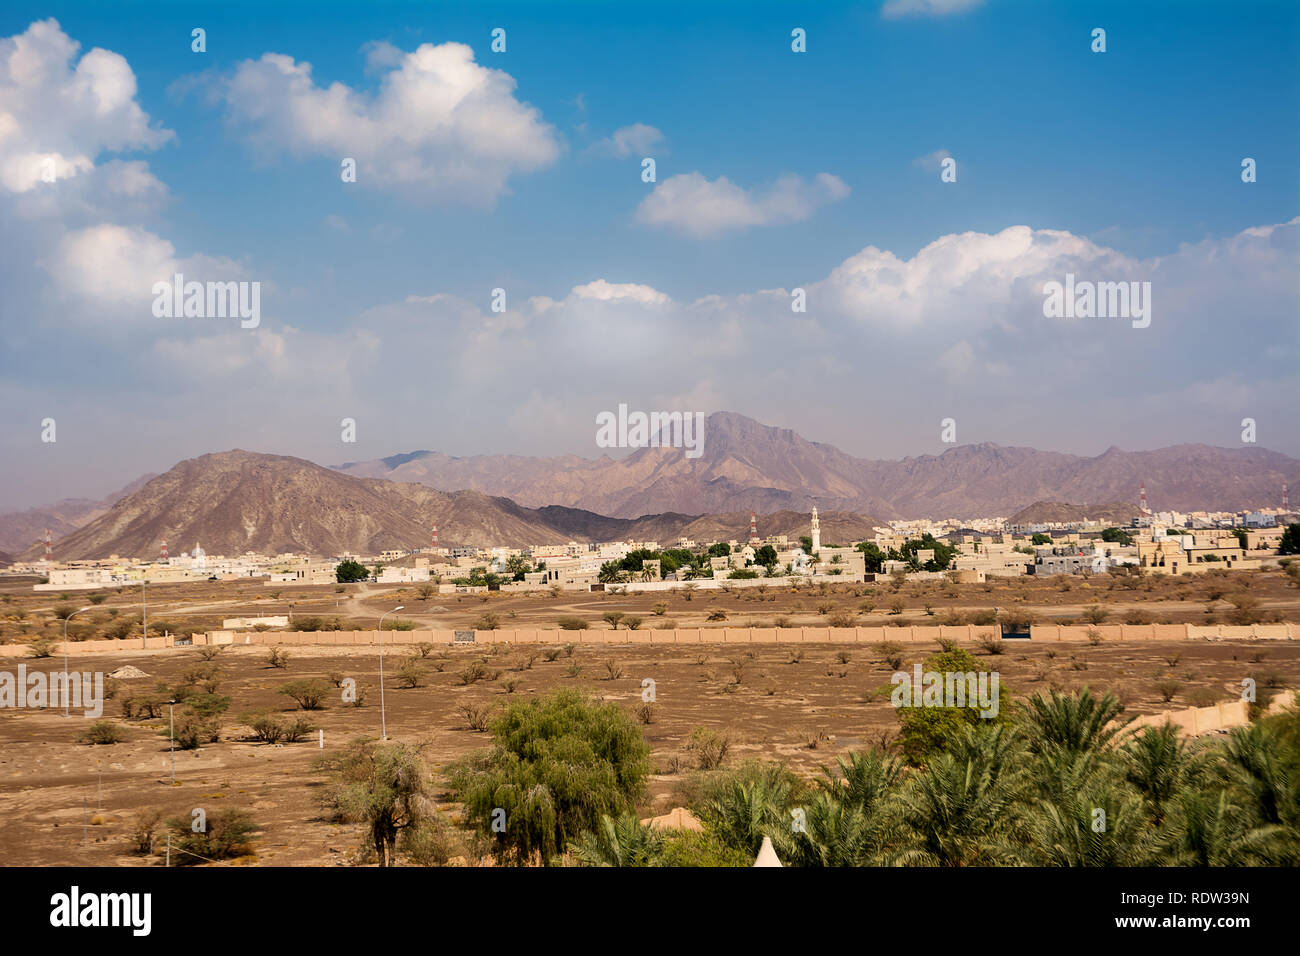 Mountain Jebel Shams and at the base the city of Bahla (Oman) Stock Photo